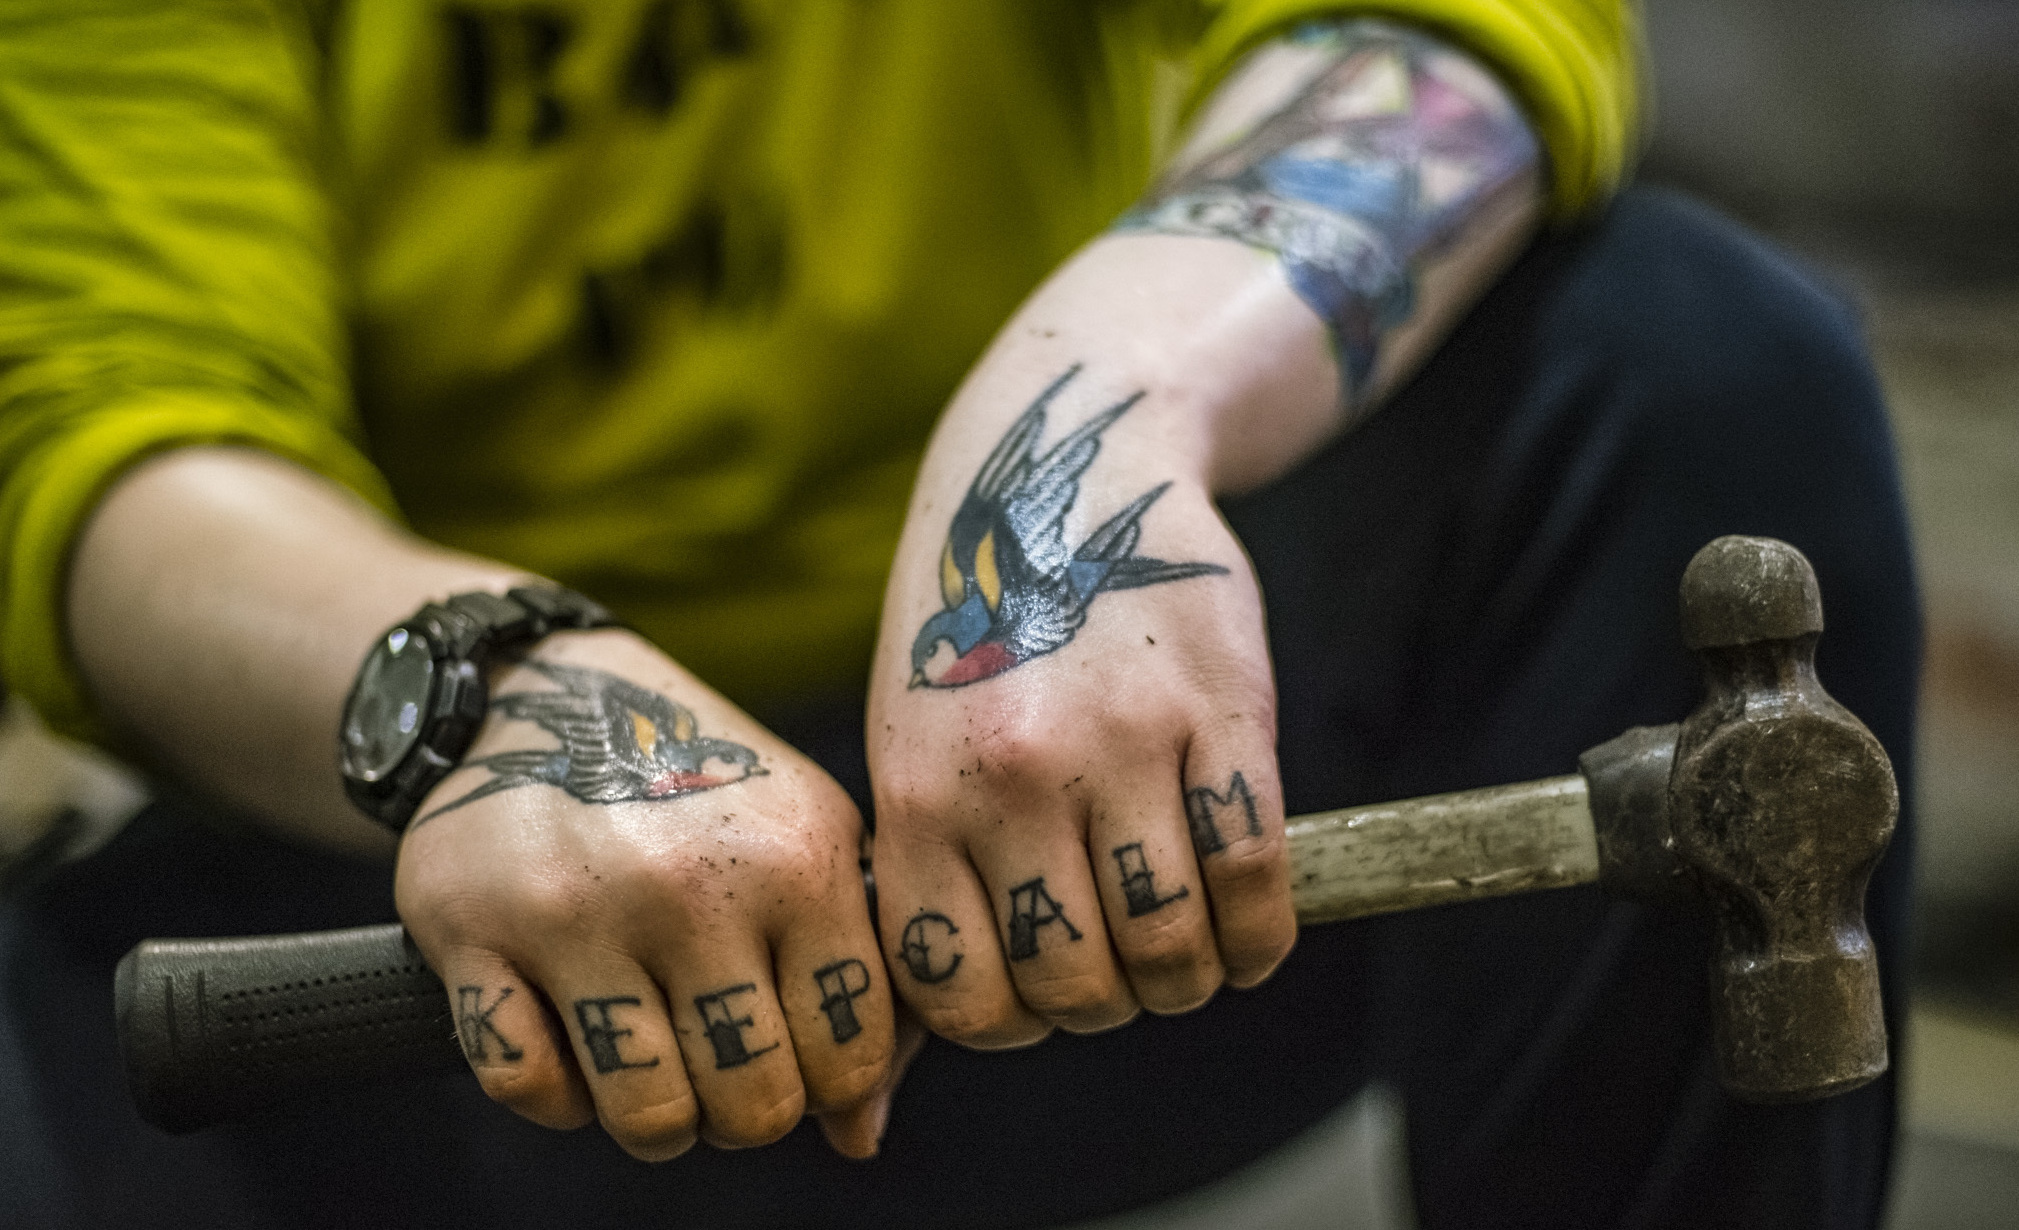 An inked culture: Sailors discuss the Navy's longstanding tattoo tradition